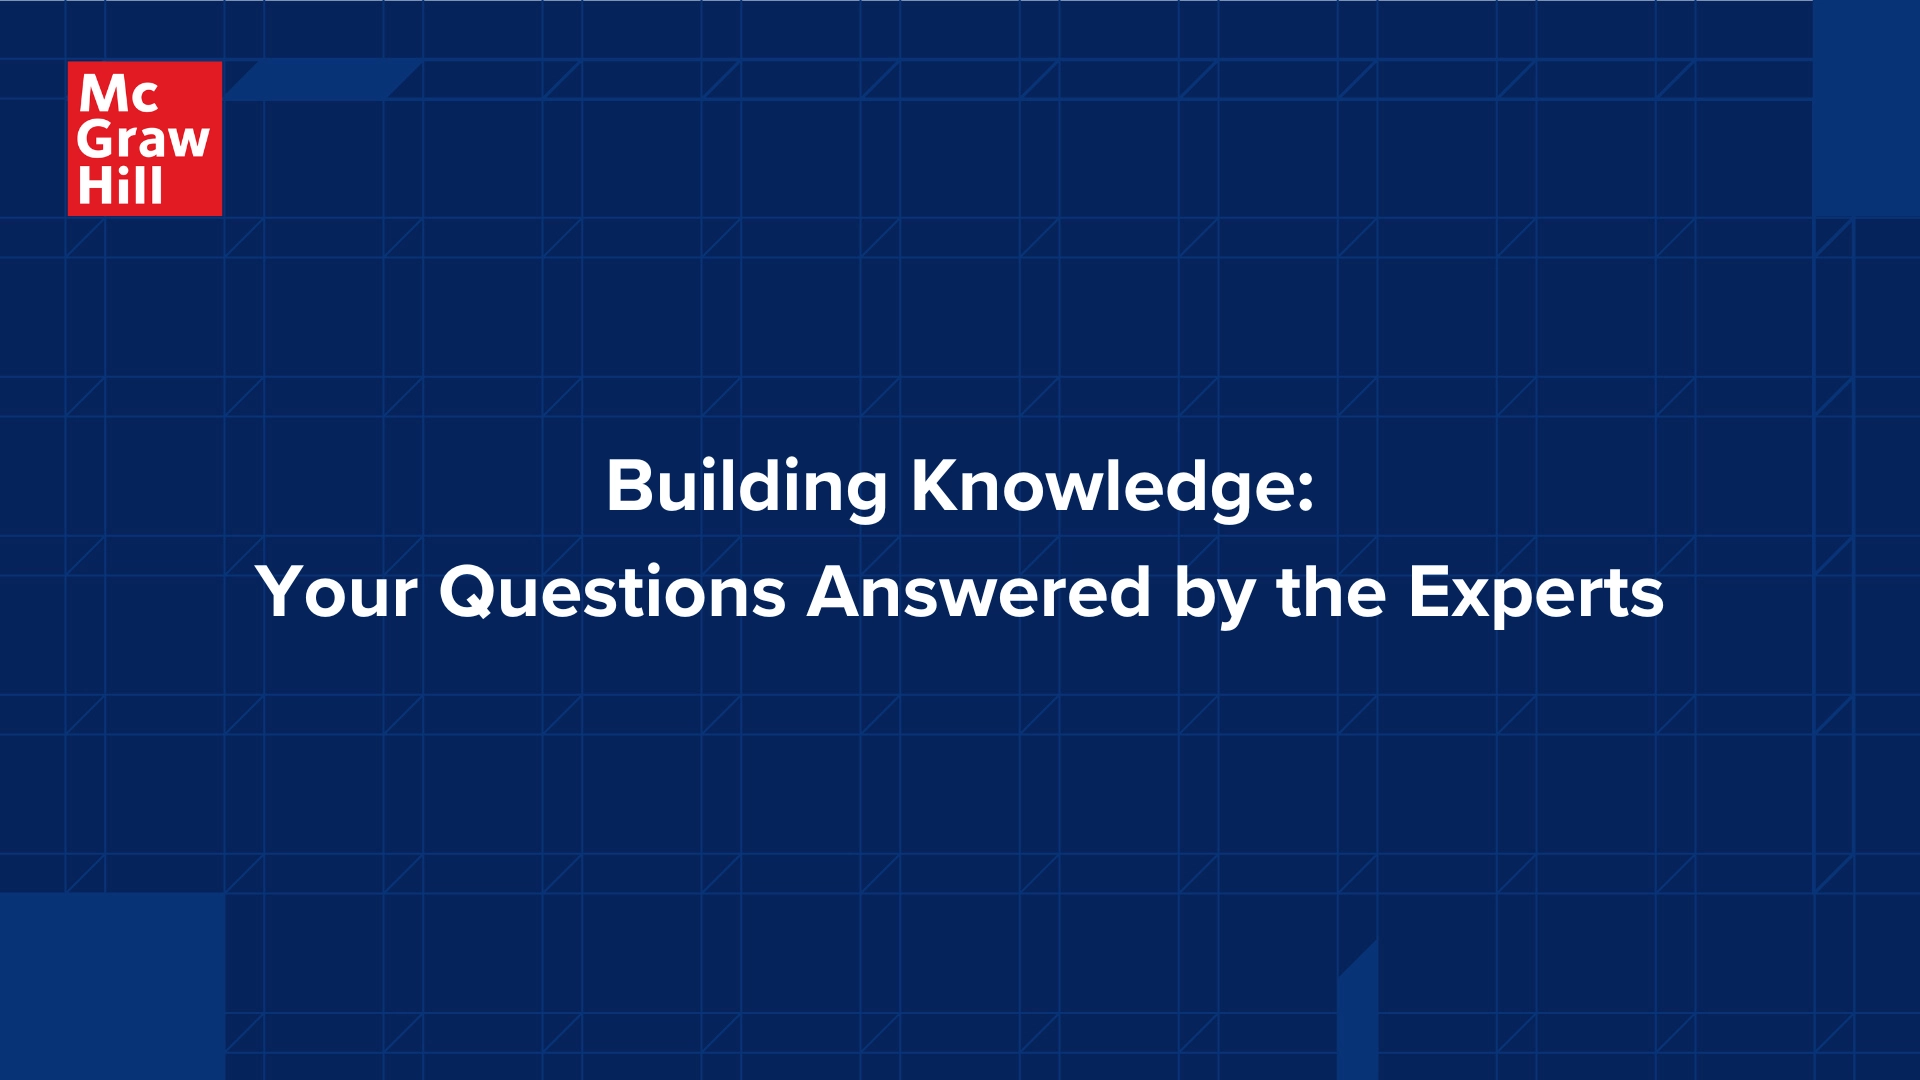 Building Knowledge QA by the Experts